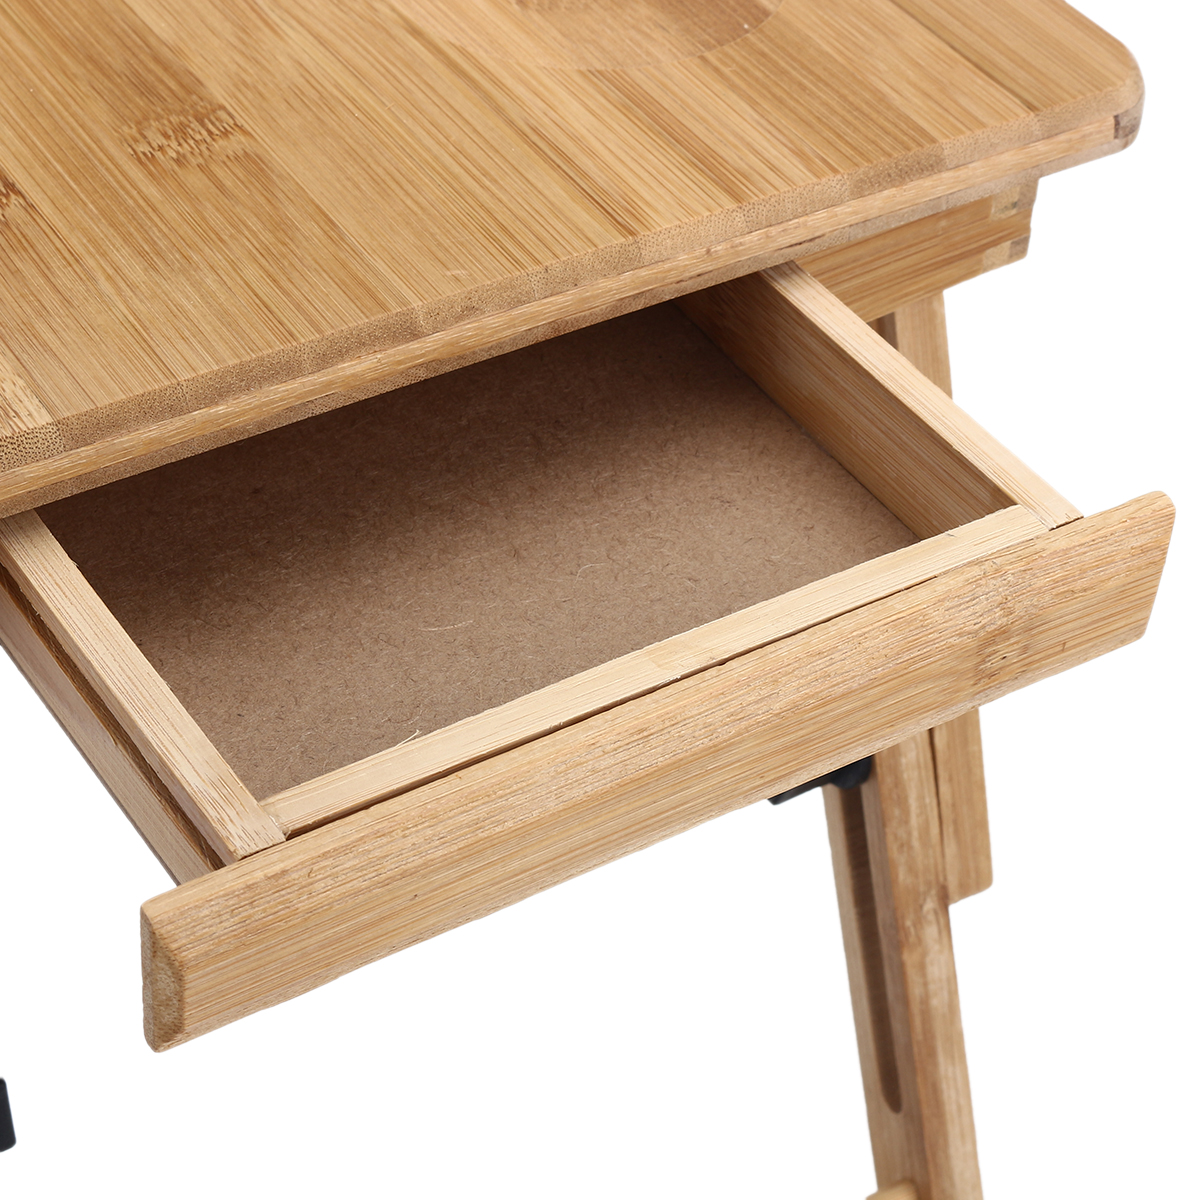 Bamboo-Laptop-Desk-Stand-Lap-Desk-Table-Flower-Pattern-Foldable-Breakfast-Serving-Bed-Tray-with-Stor-1798257-11